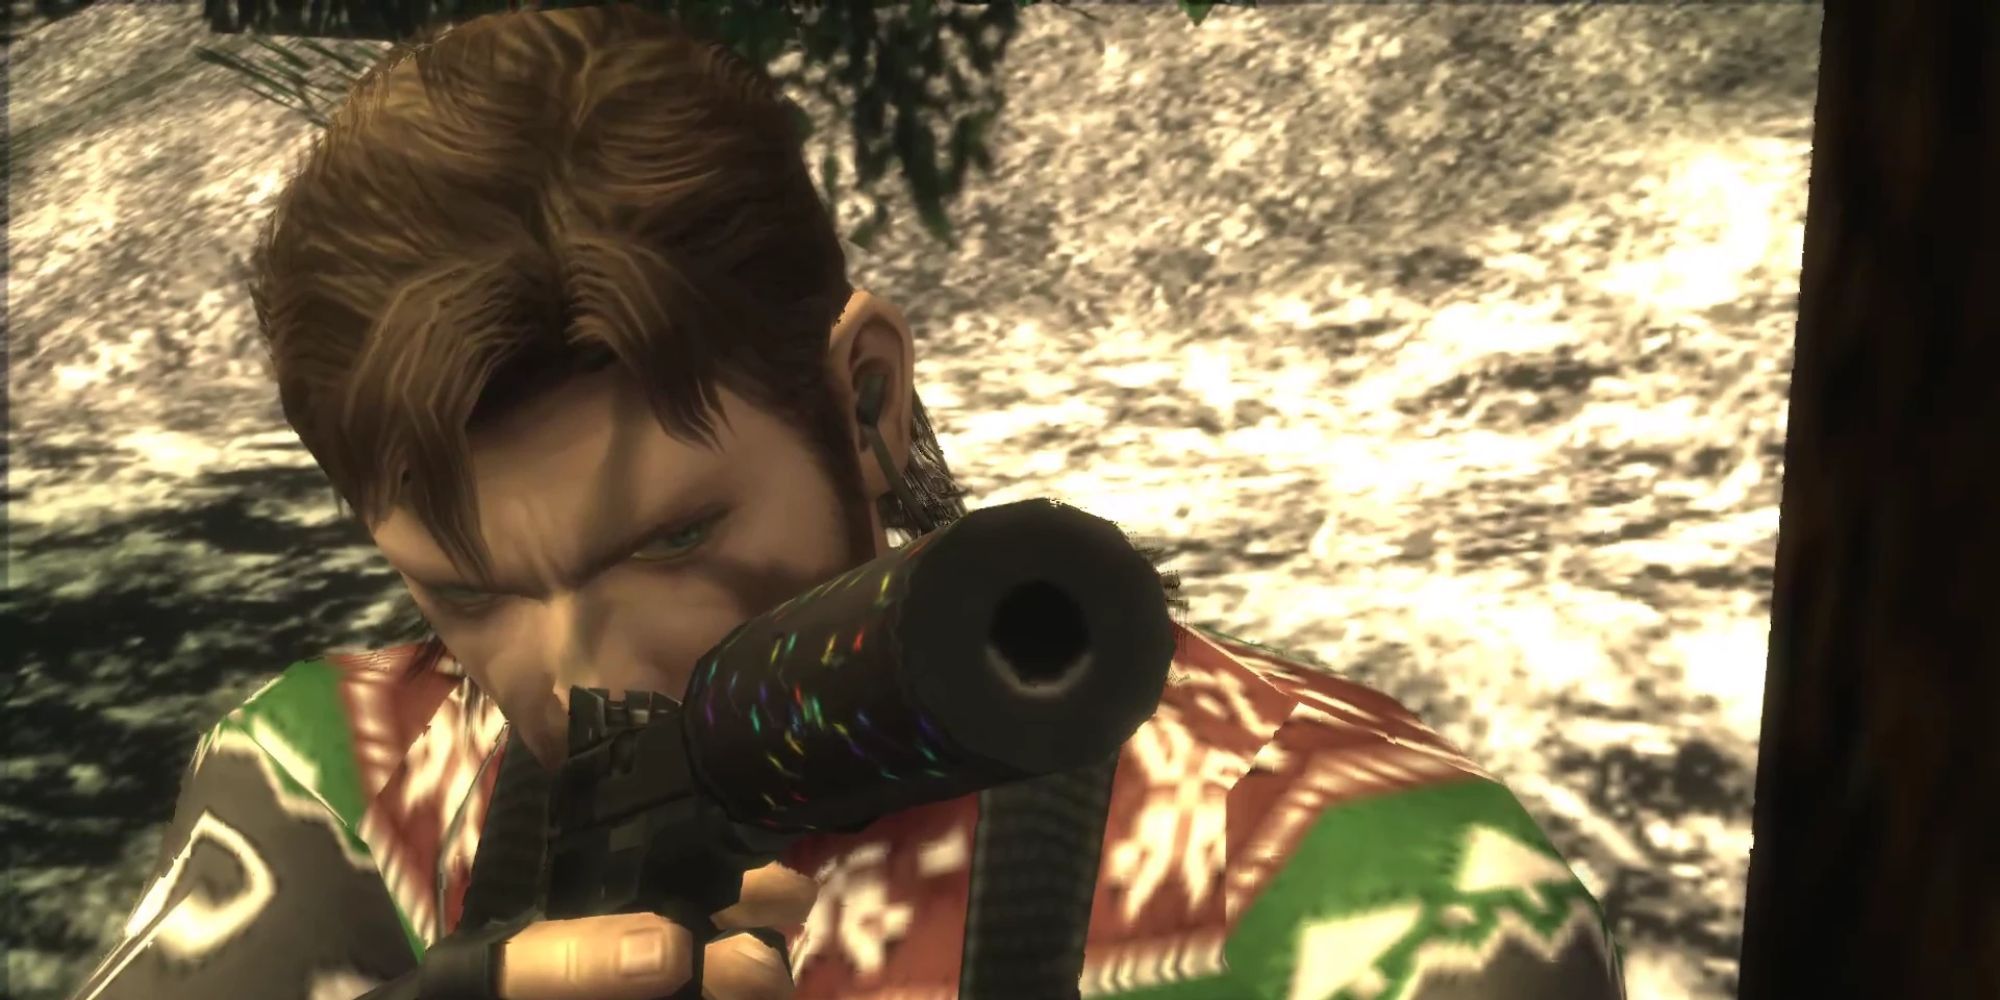 A Christmas mod for Metal Gear Solid 3: Snake Eater called Metal Gear Jolly.